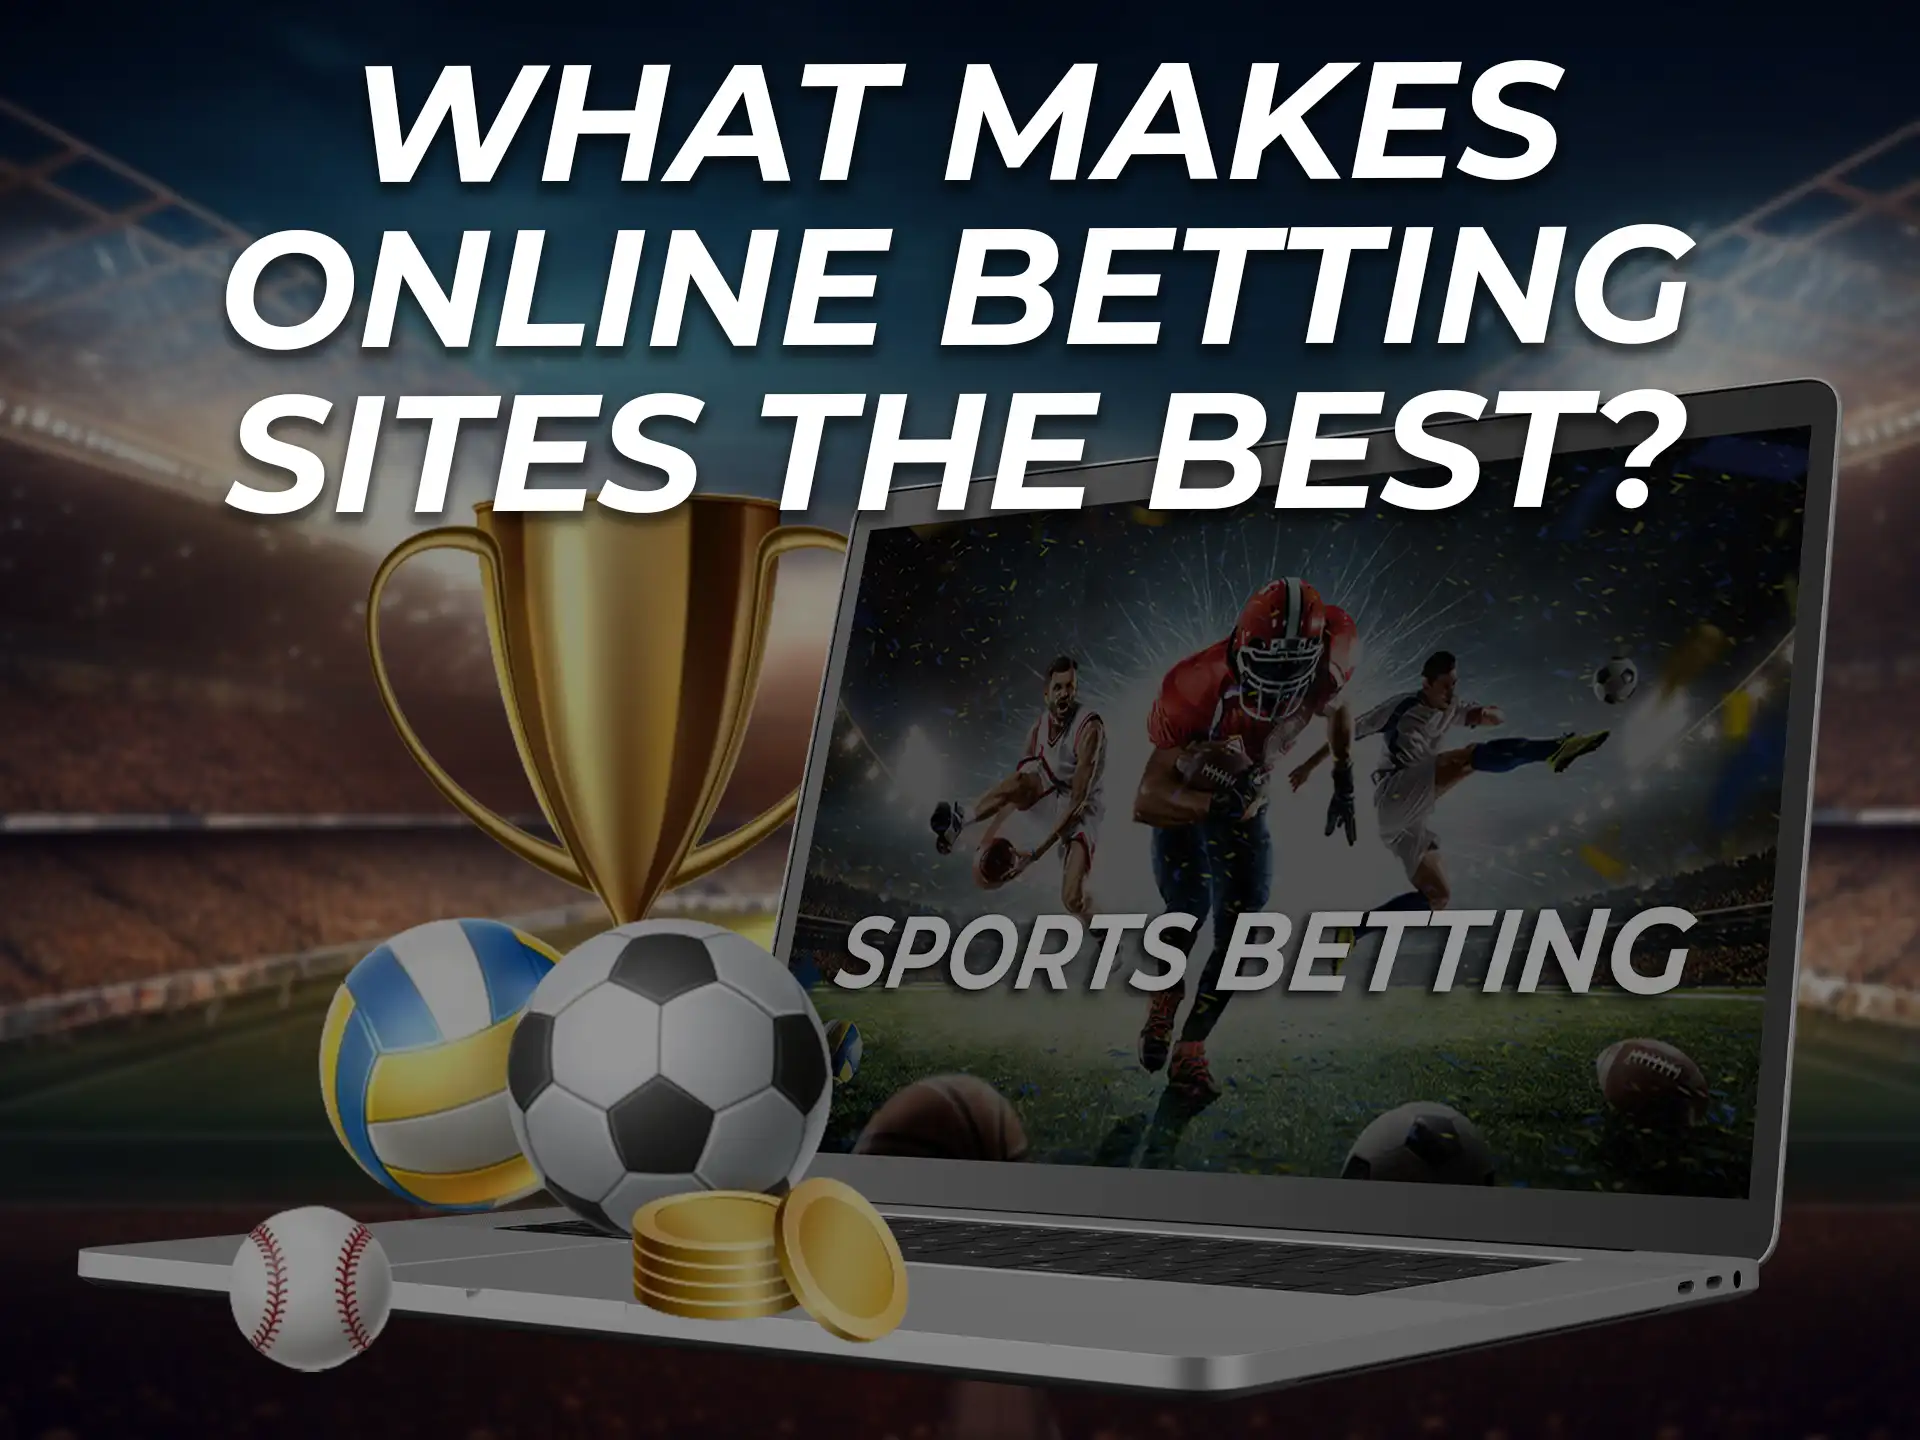 You can determine the quality of an online betting site by several criteria.